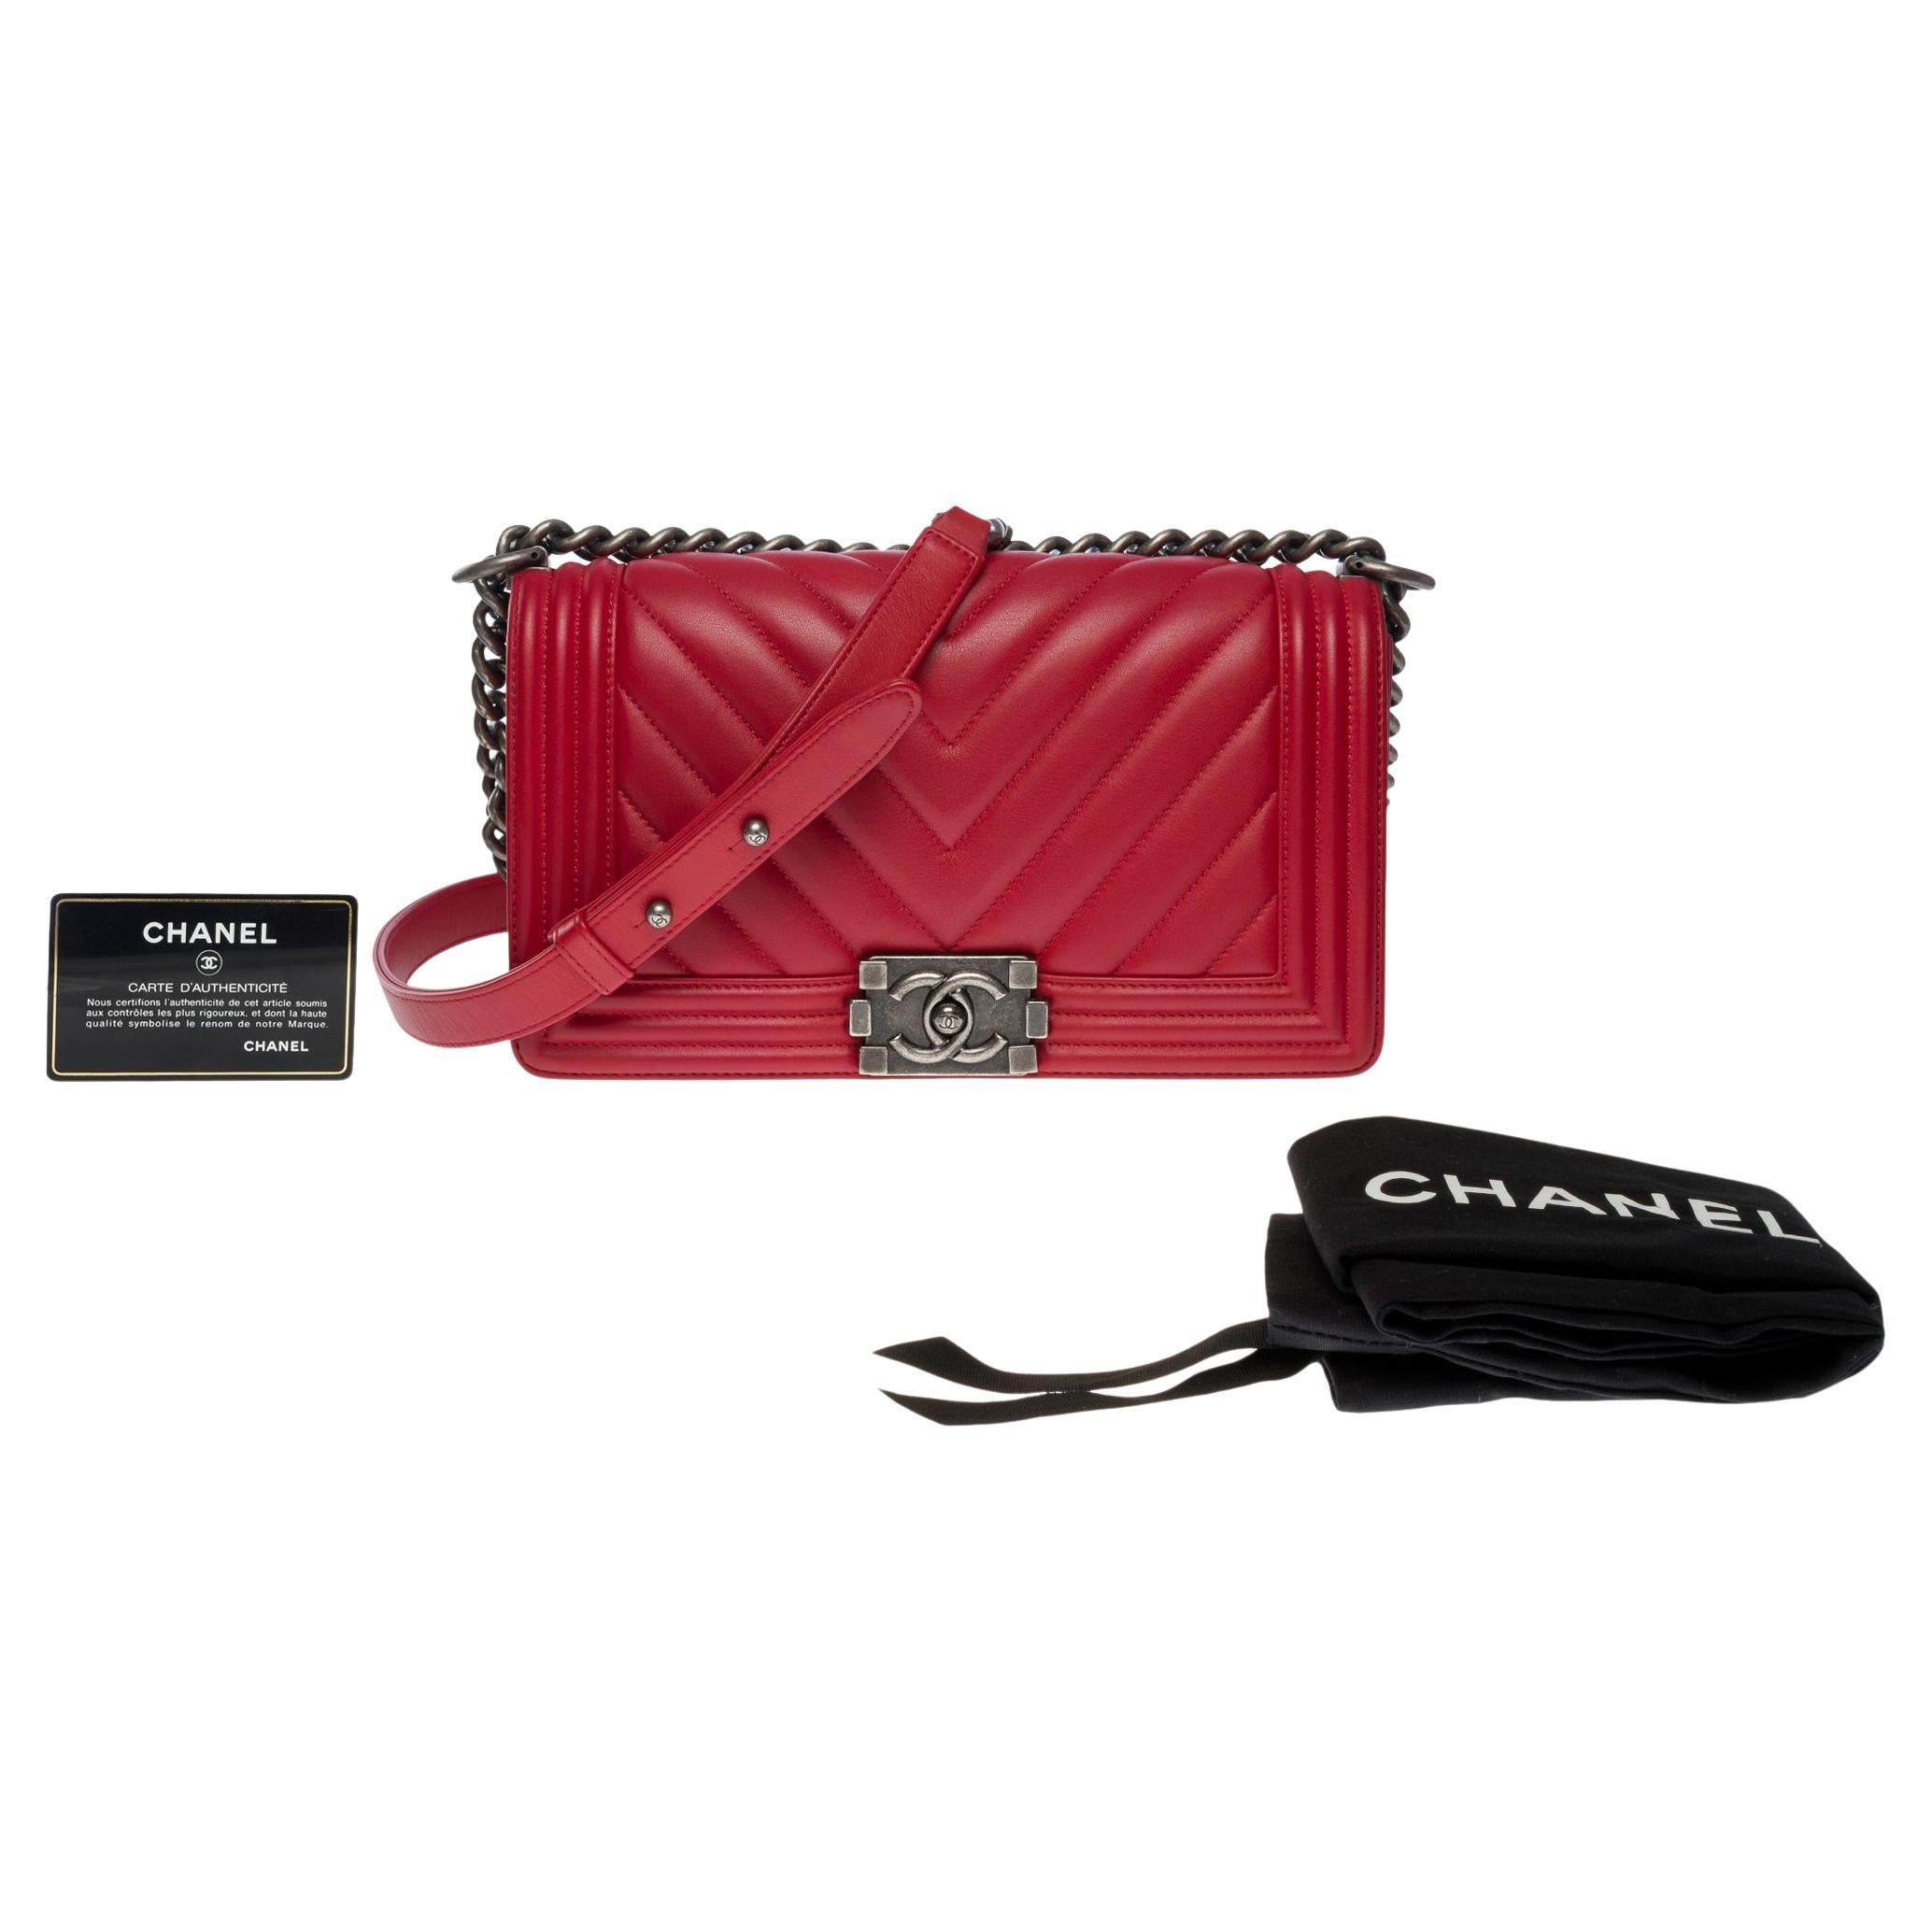 Chanel Boy Old Medium shoulder bag in red quilted herringbone leather, SHW For Sale